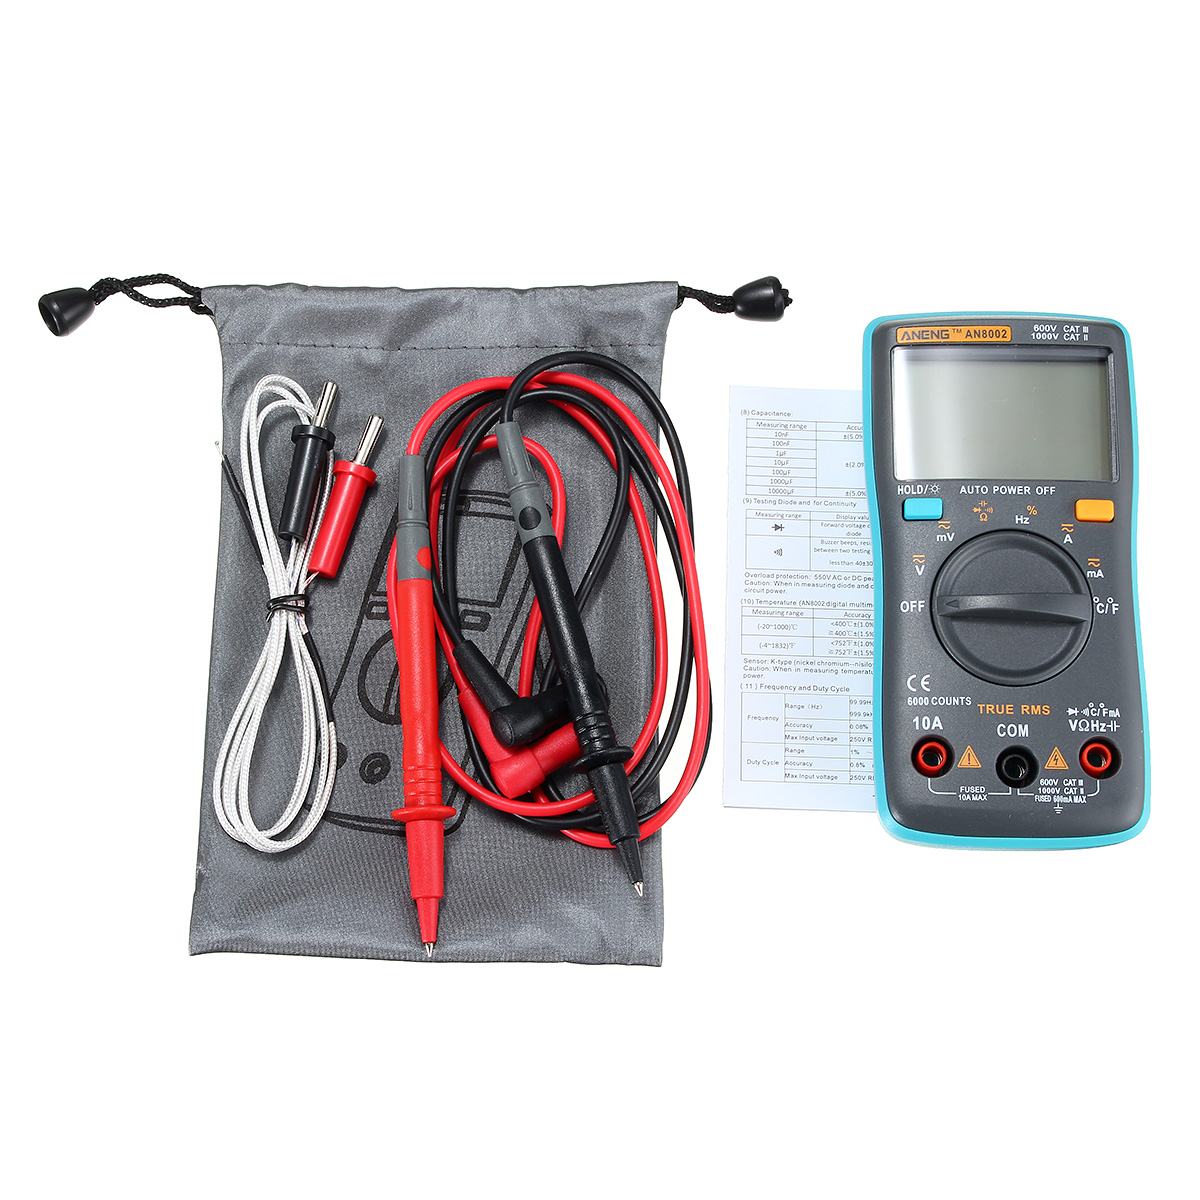 ANENG AN8002 Digital True RMS 6000 Counts Multimeter AC/DC Current Voltage Frequency Resistance Temperature Tester ℃/℉ 20